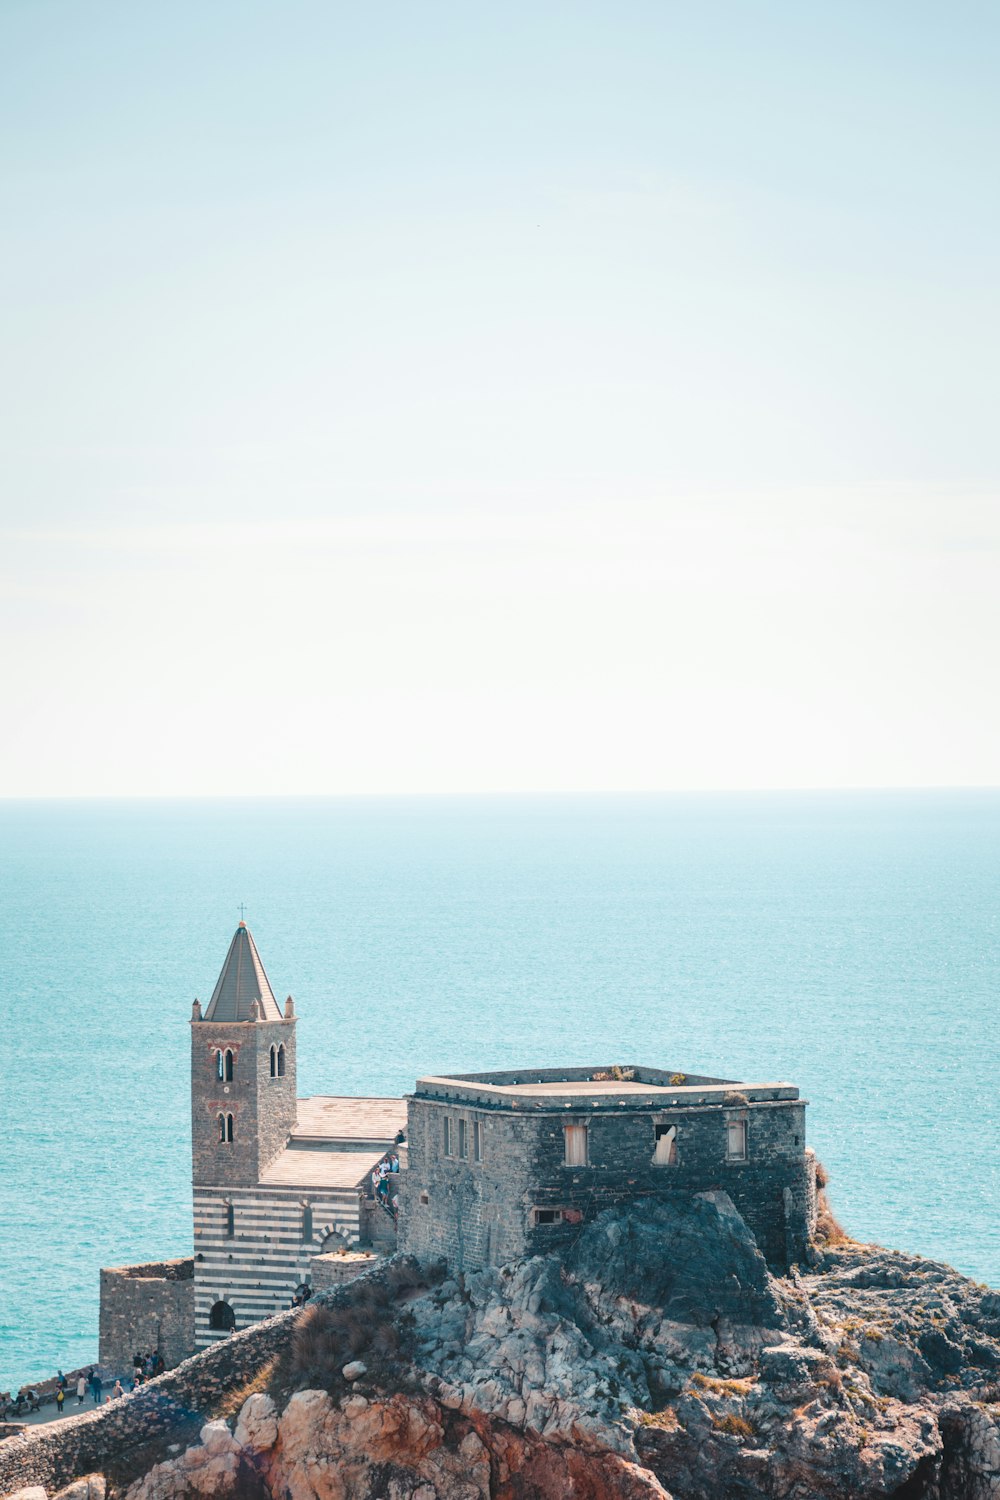 an old church on a rocky outcropping overlooking the ocean